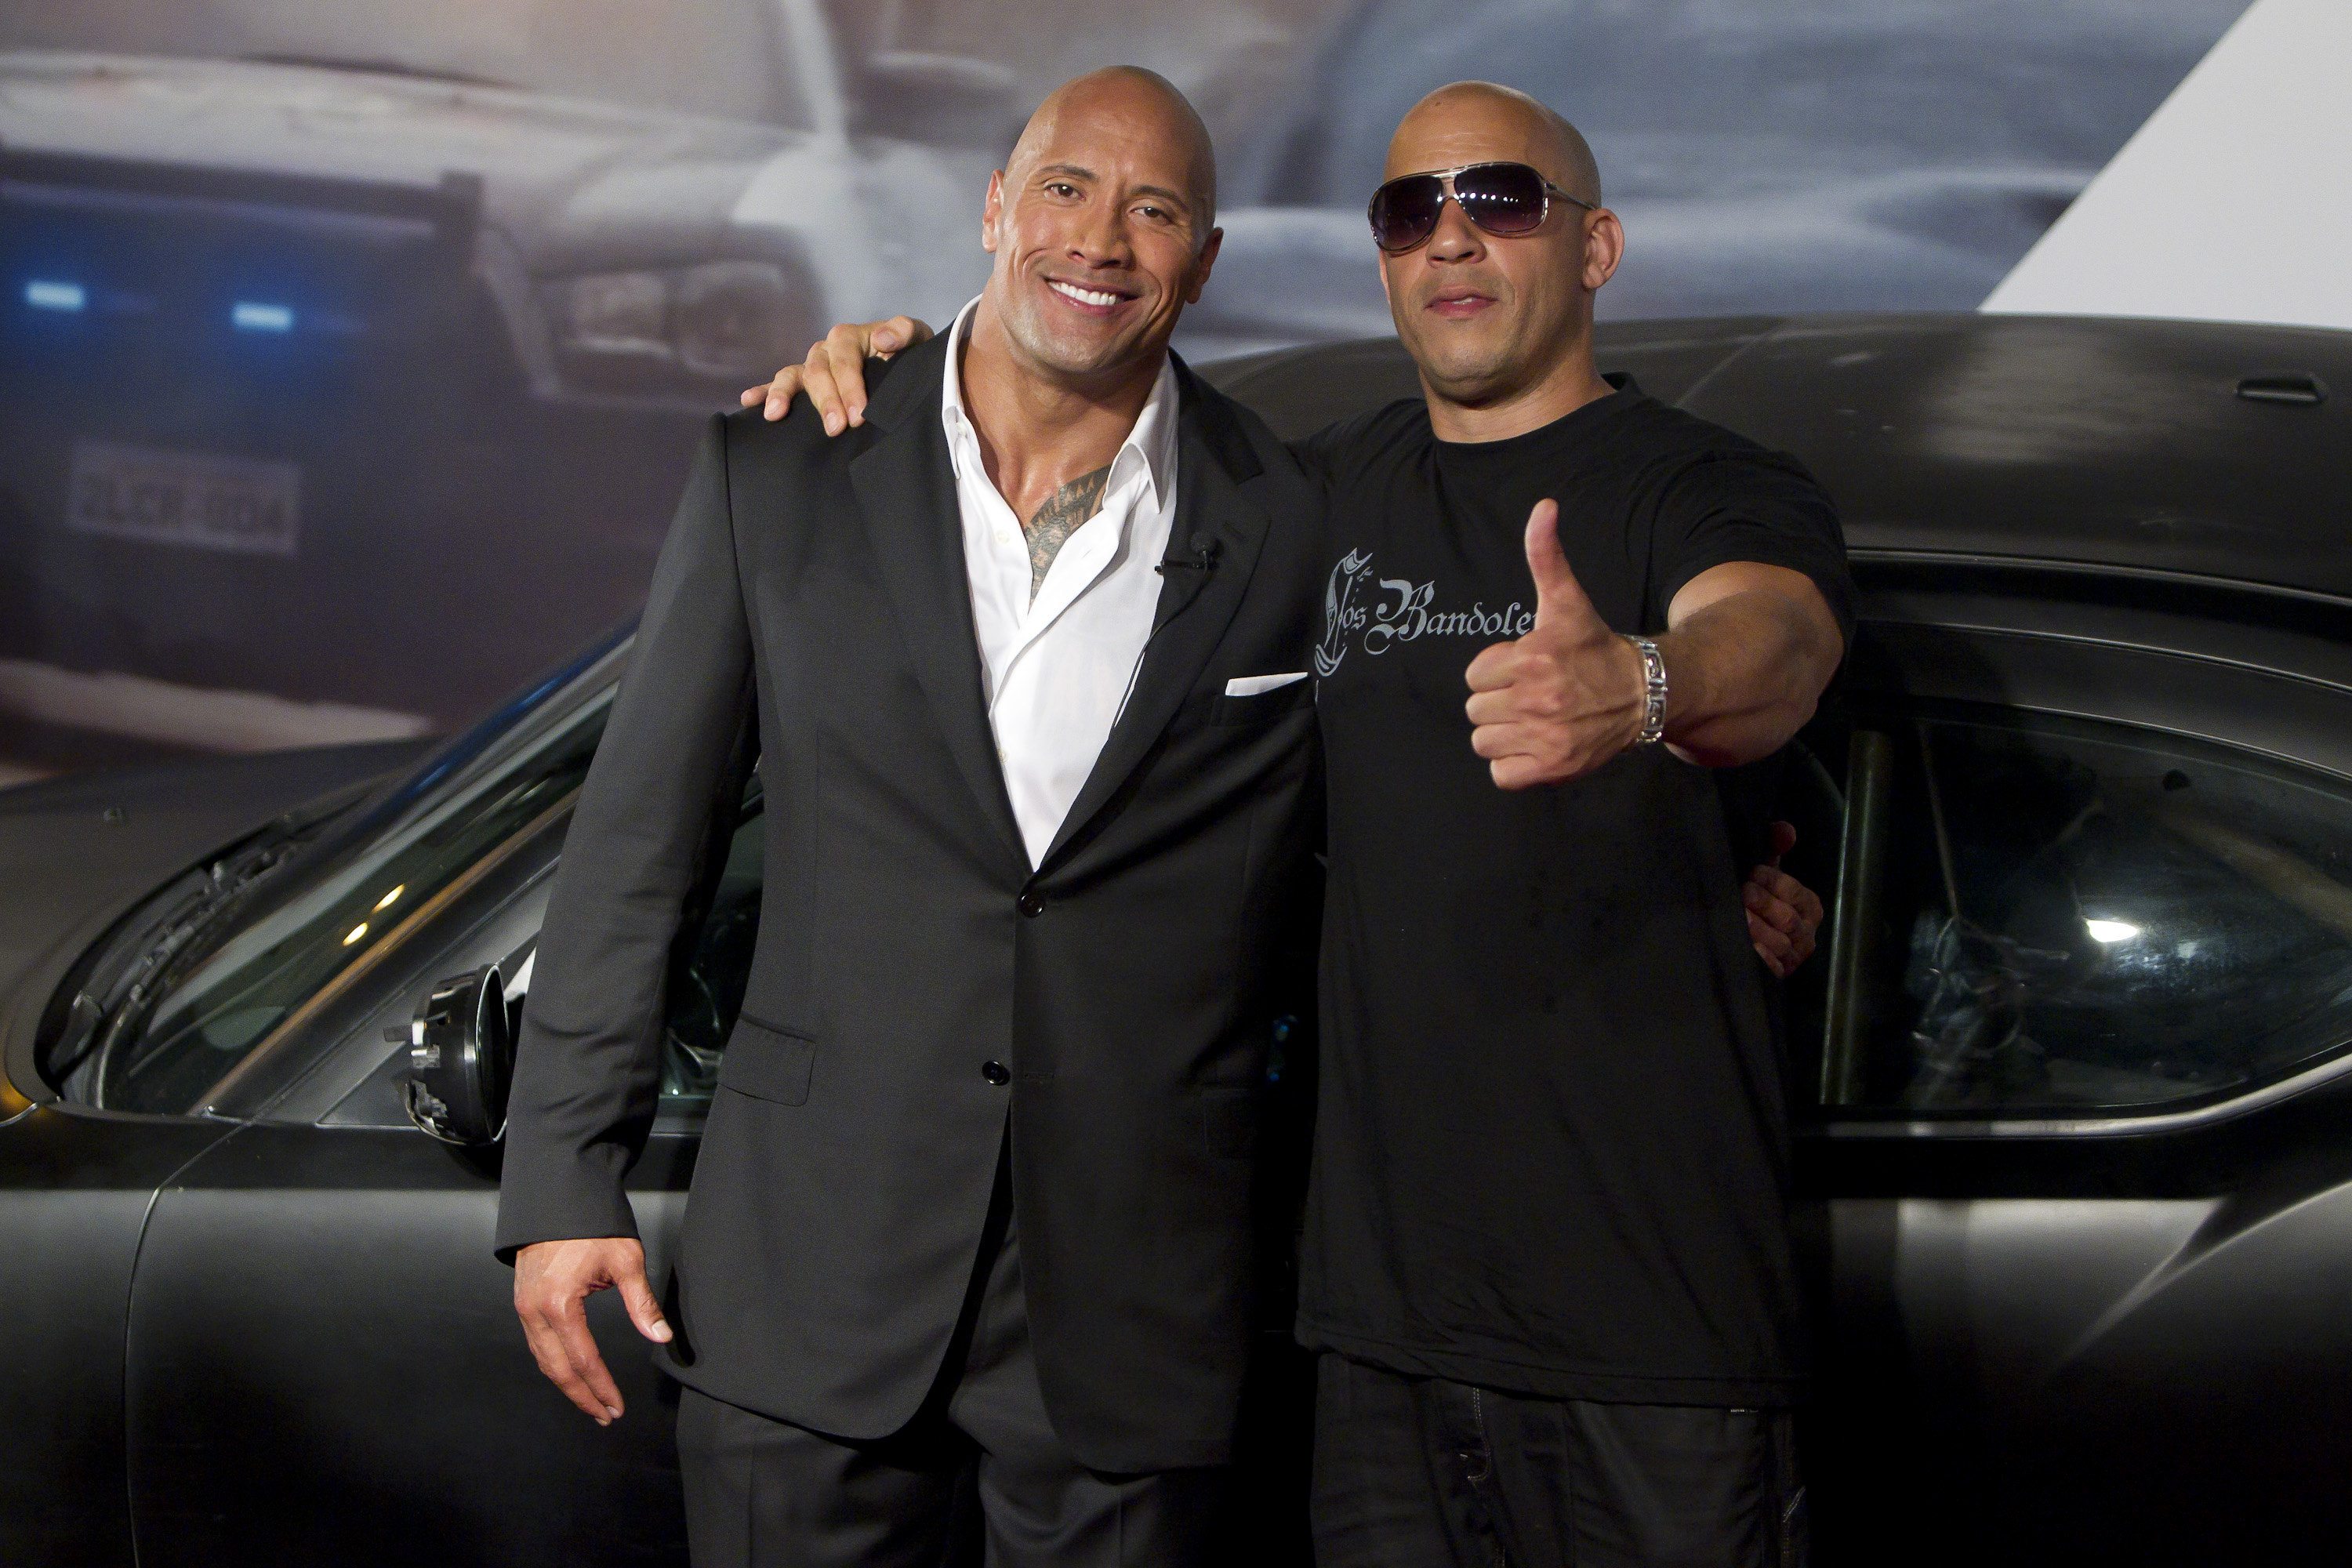 Dwayne Johnson and Vin Diesel pose for photographers during the premiere of the movie "Fast and Furious 5"